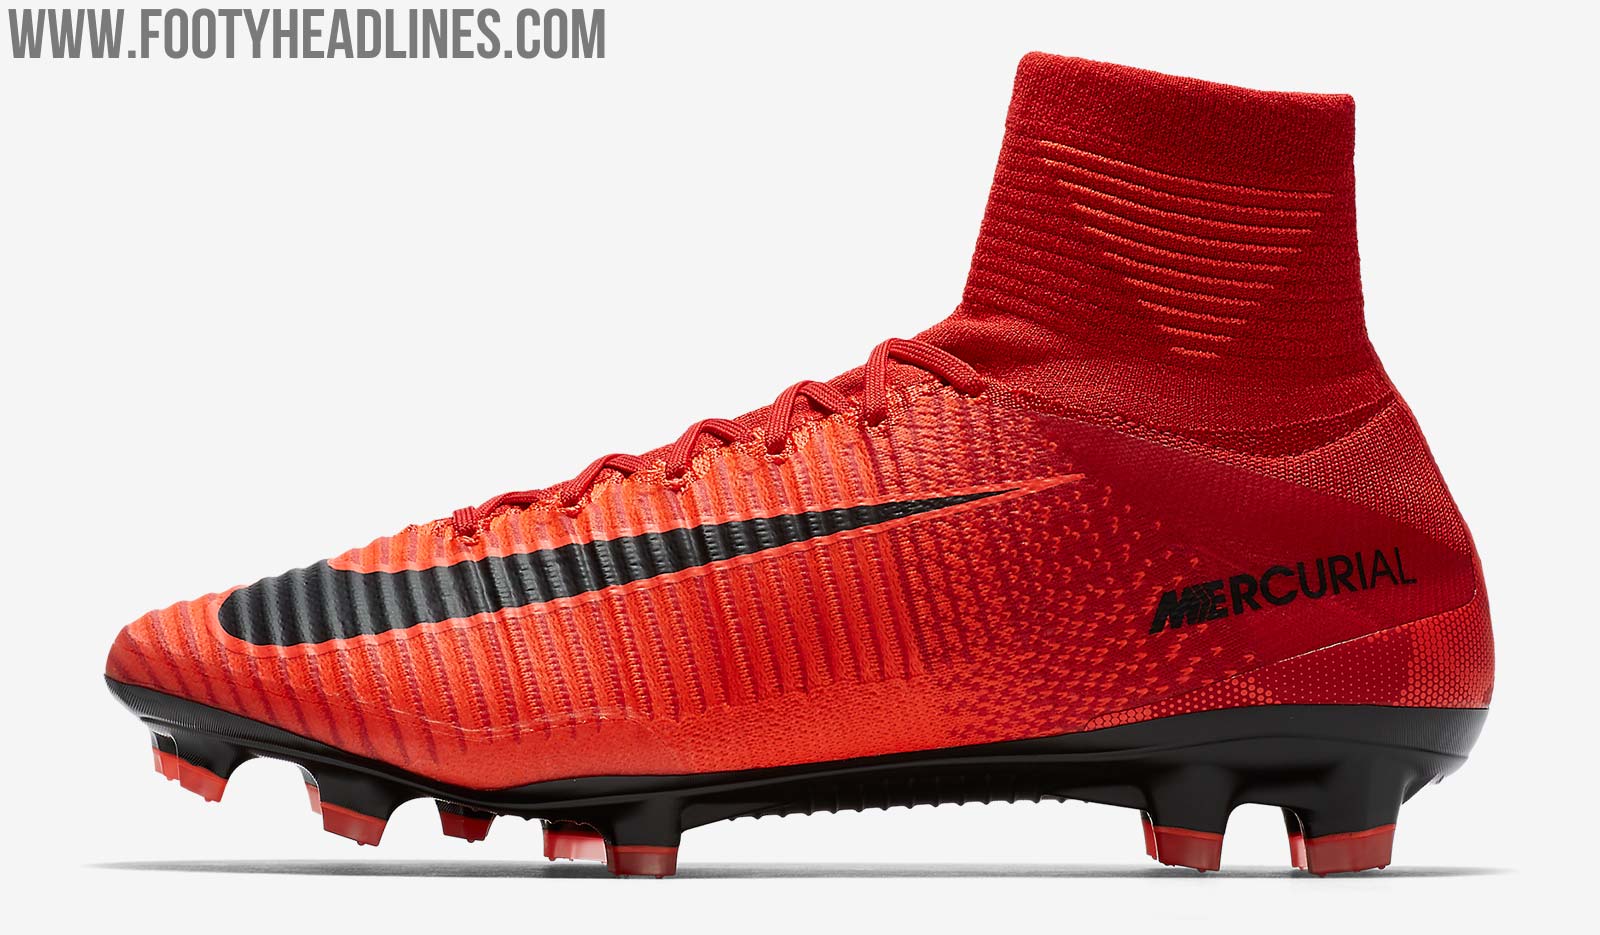 Nike Mercurial V Fire Pack Boots Revealed - Footy Headlines